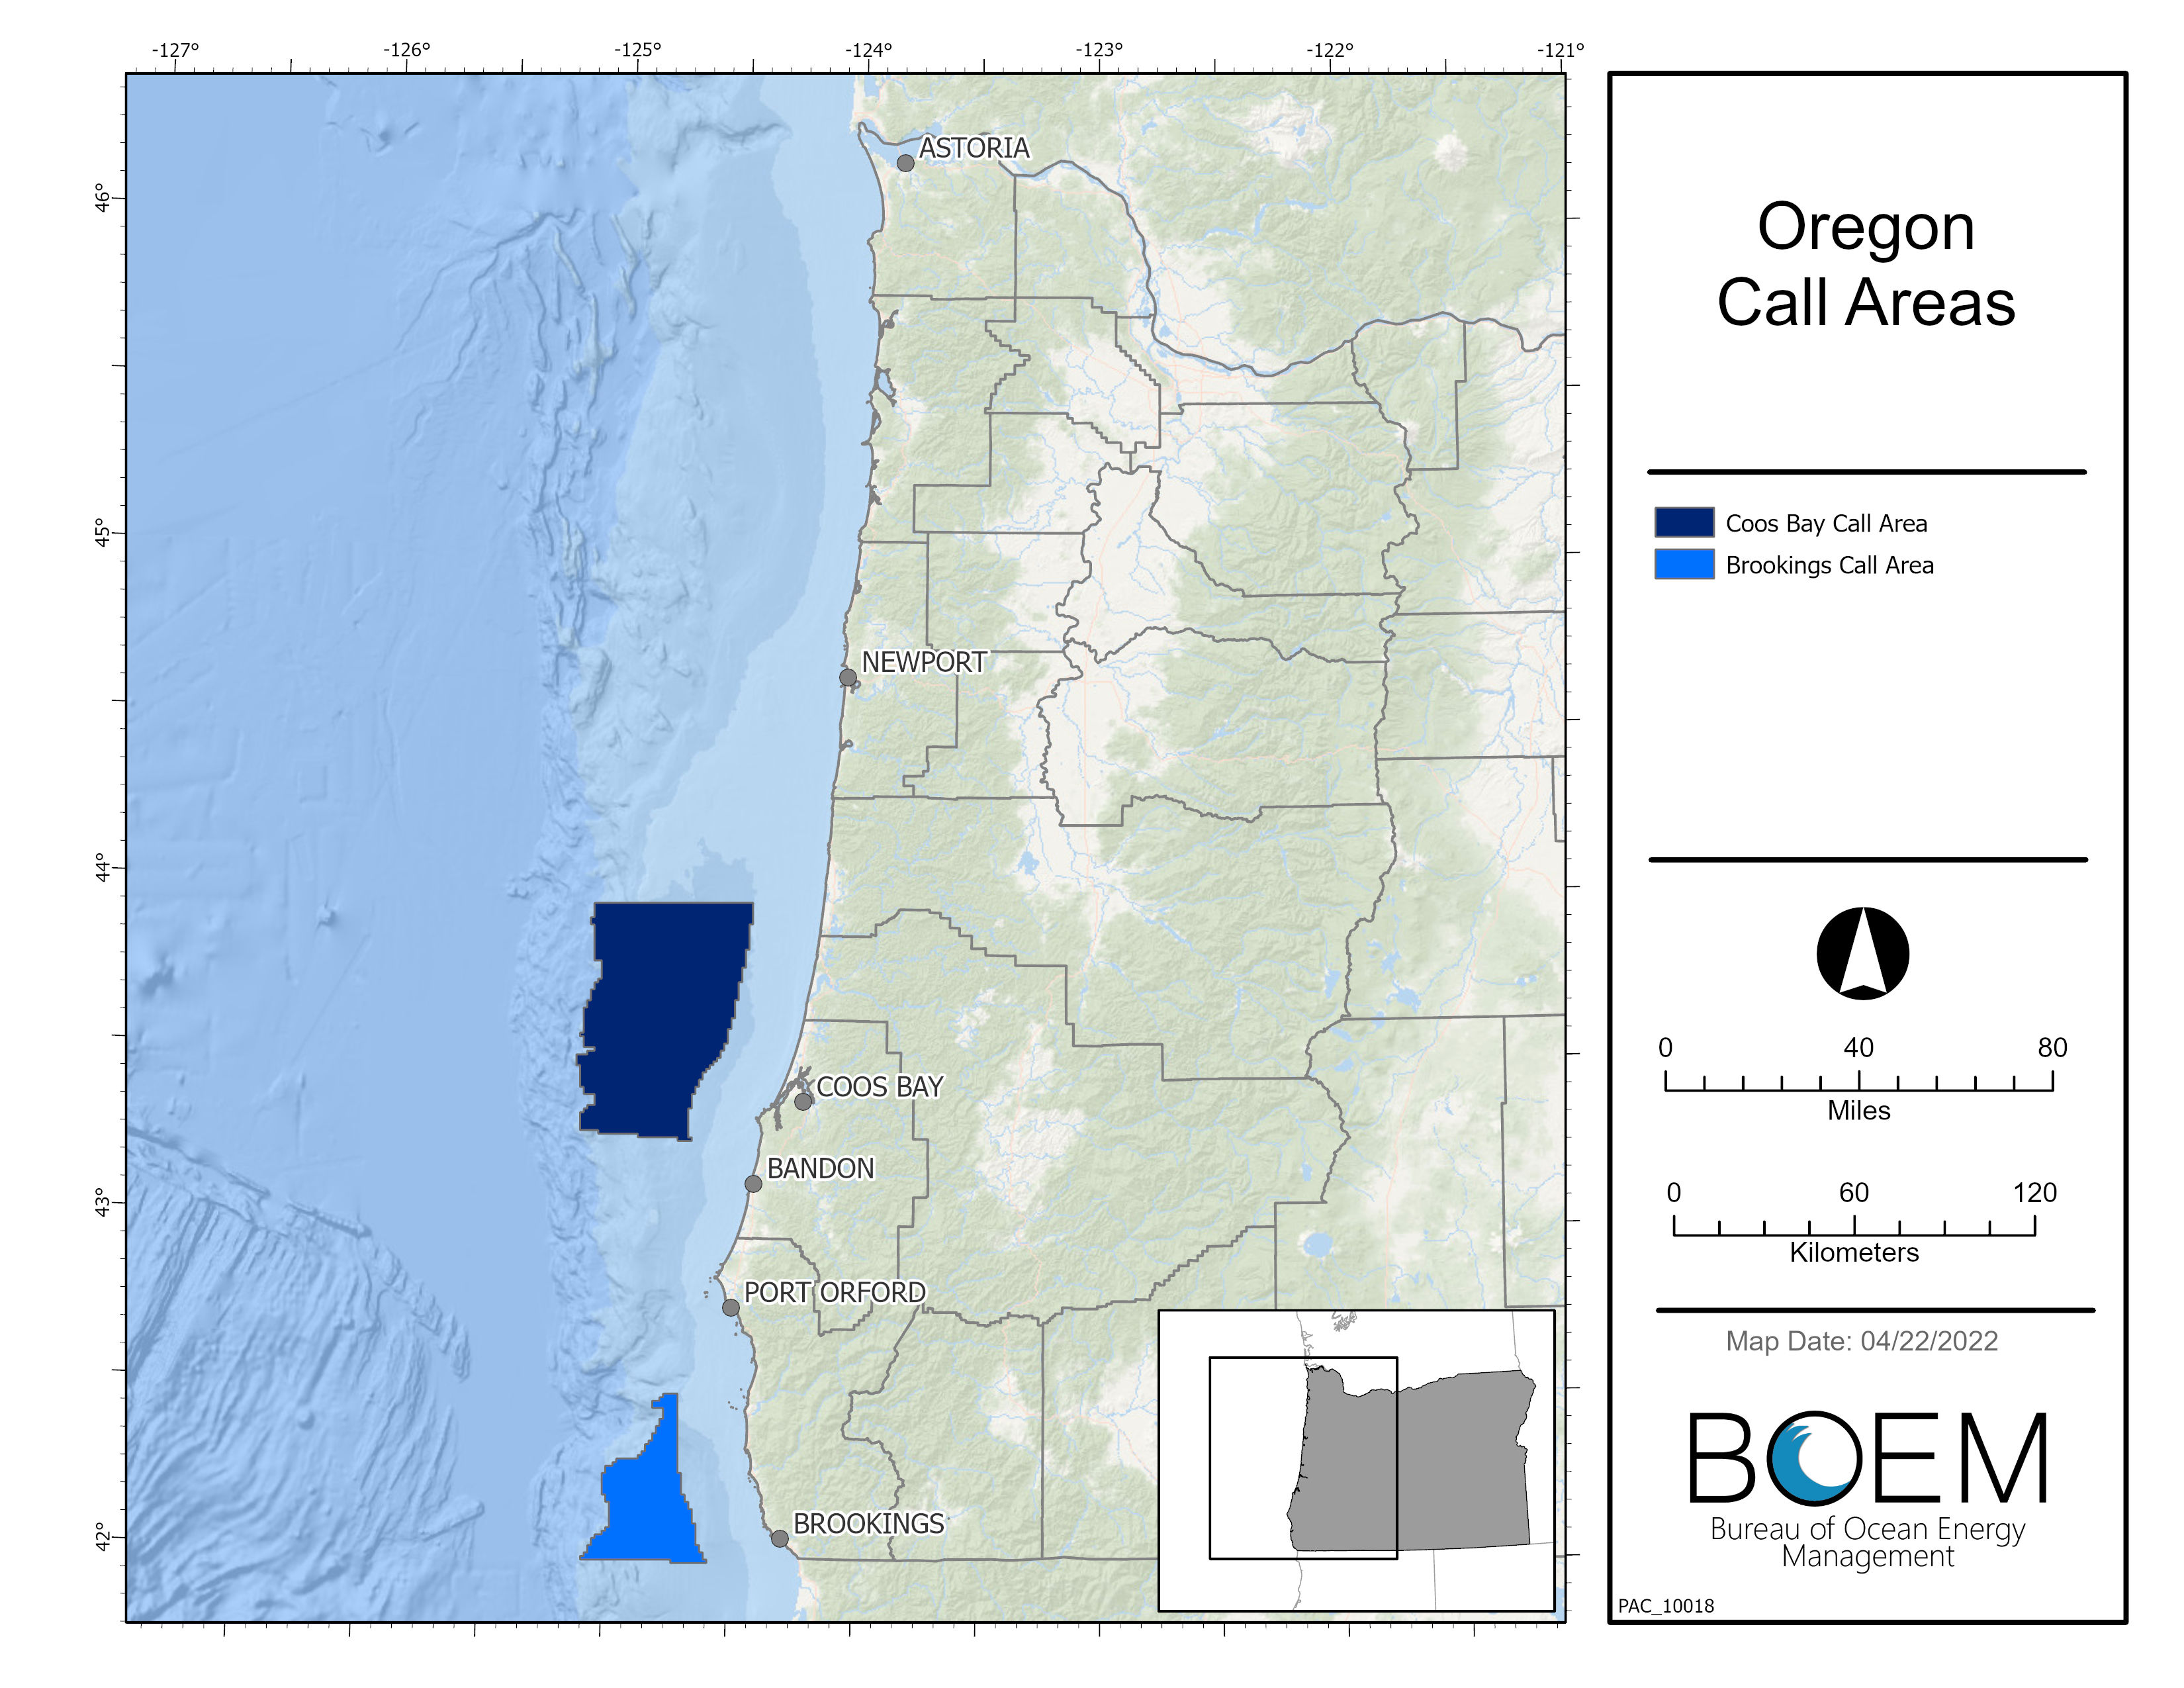 Pacific fishery council calls for new start to offshore wind planning